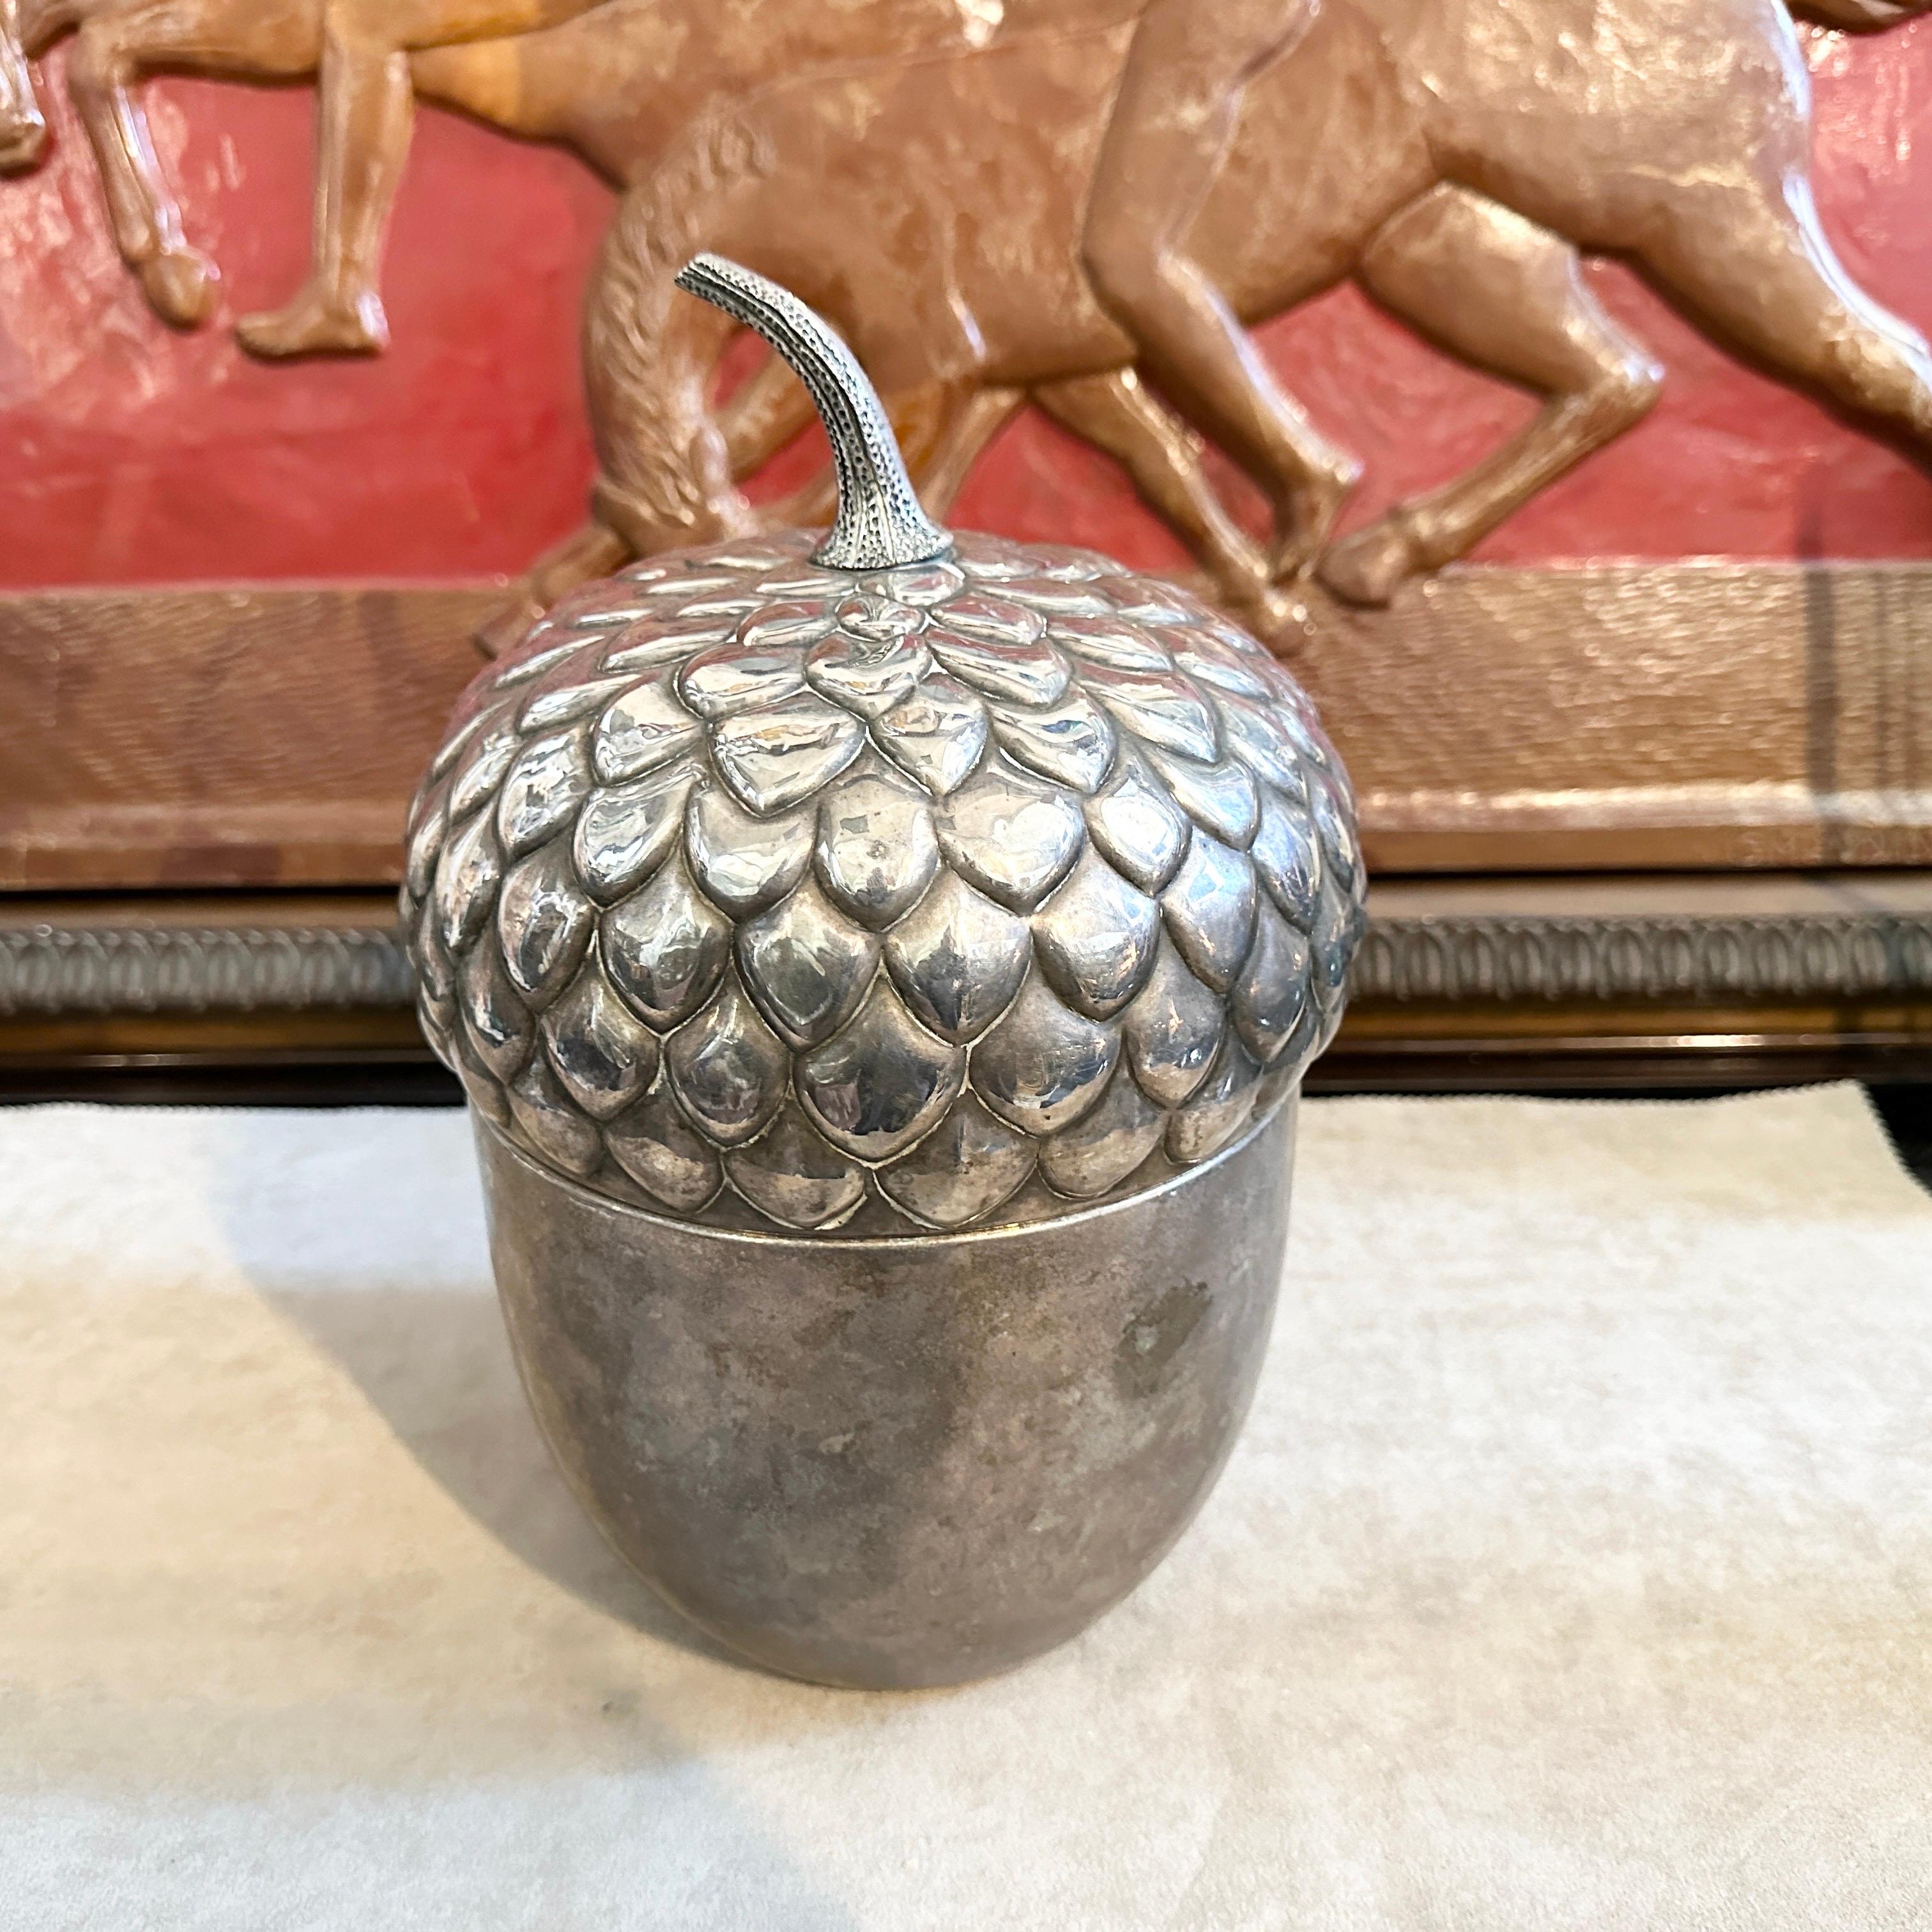 Italian 1970s Modernist Silver Plated Acorn Shaped Ice Bucket by Teghini Firenze For Sale